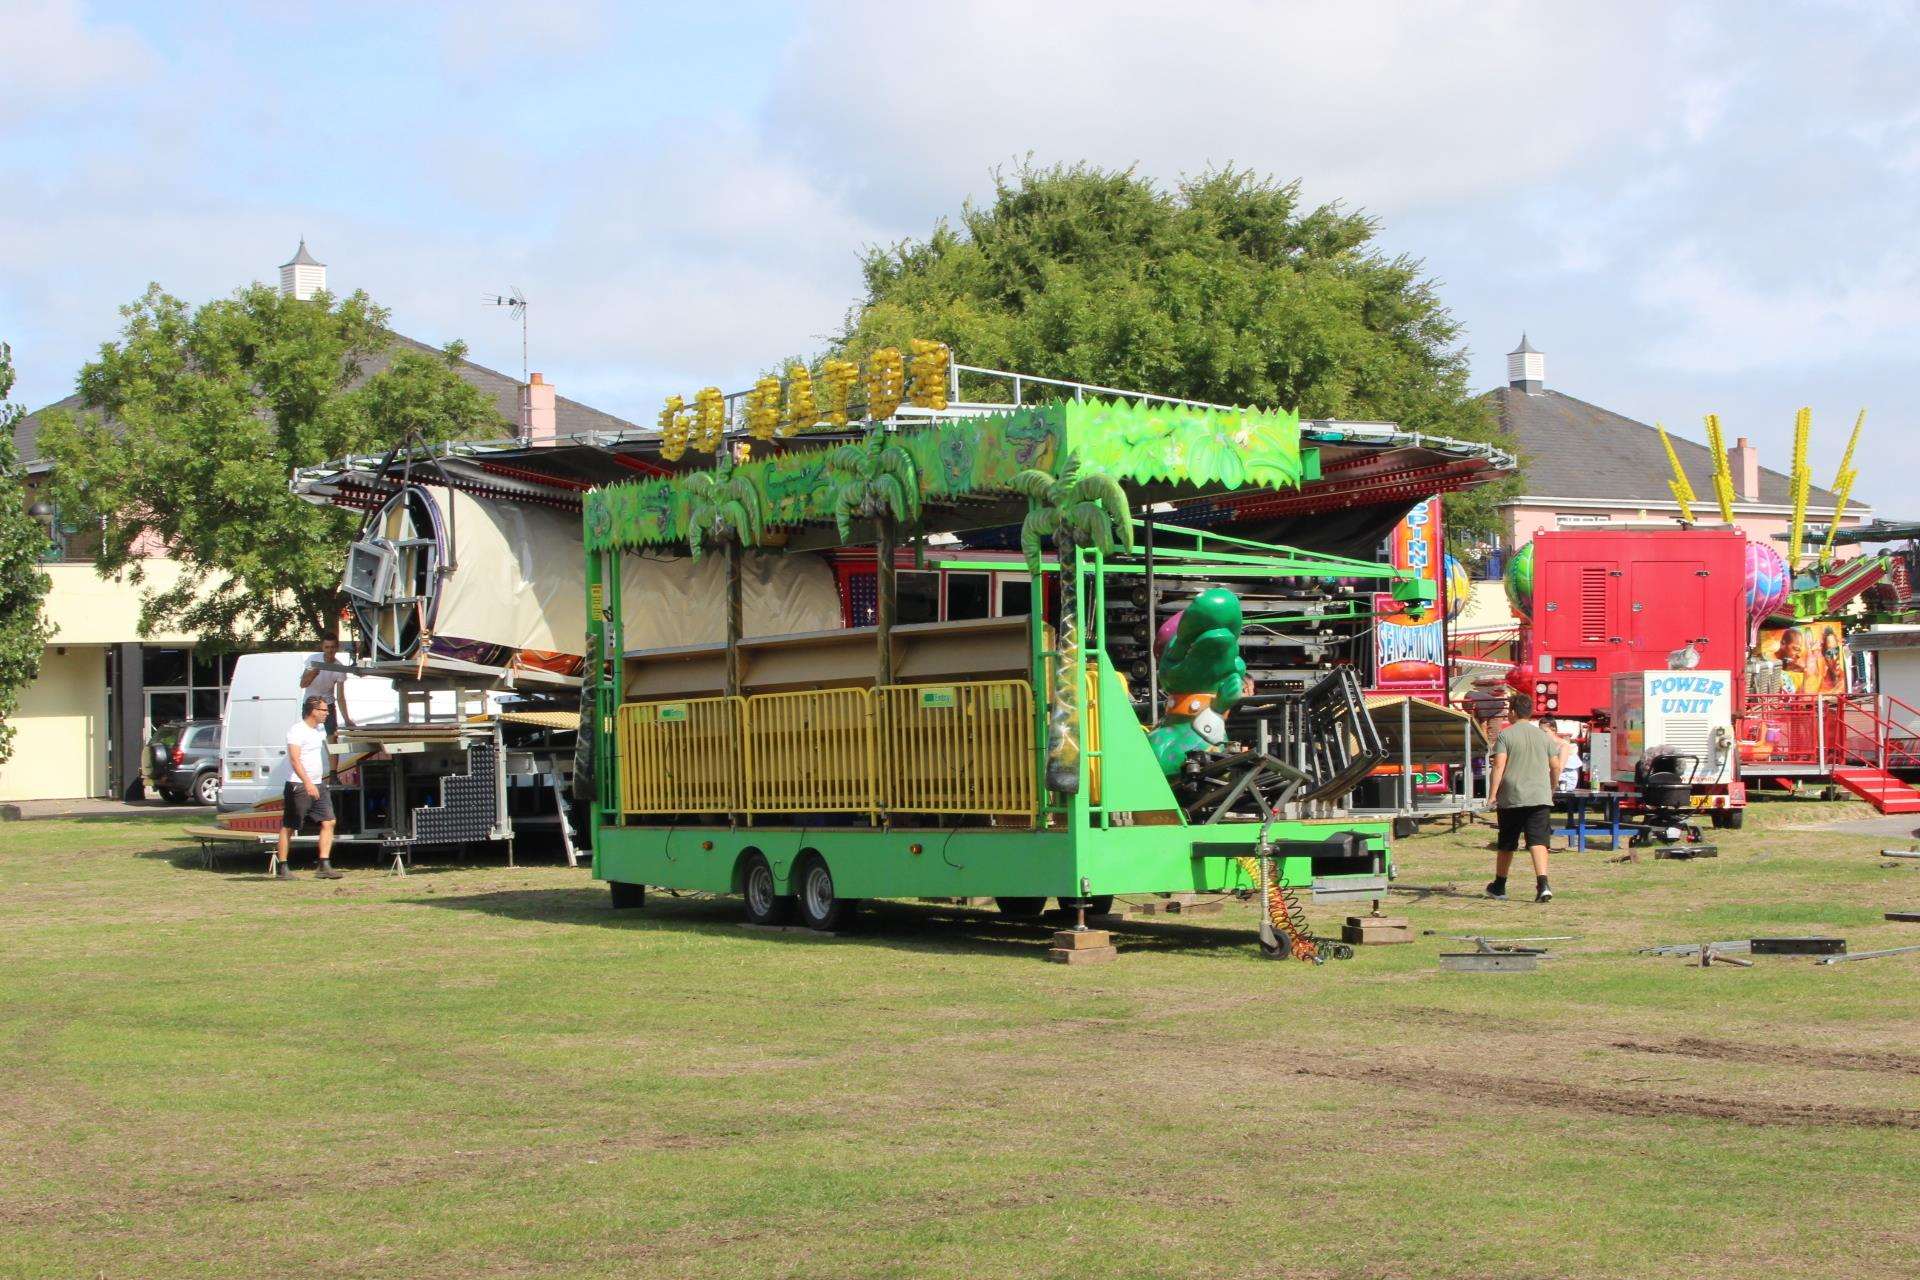 The funfair sets up at Beachfields, Sheerness (3628234)